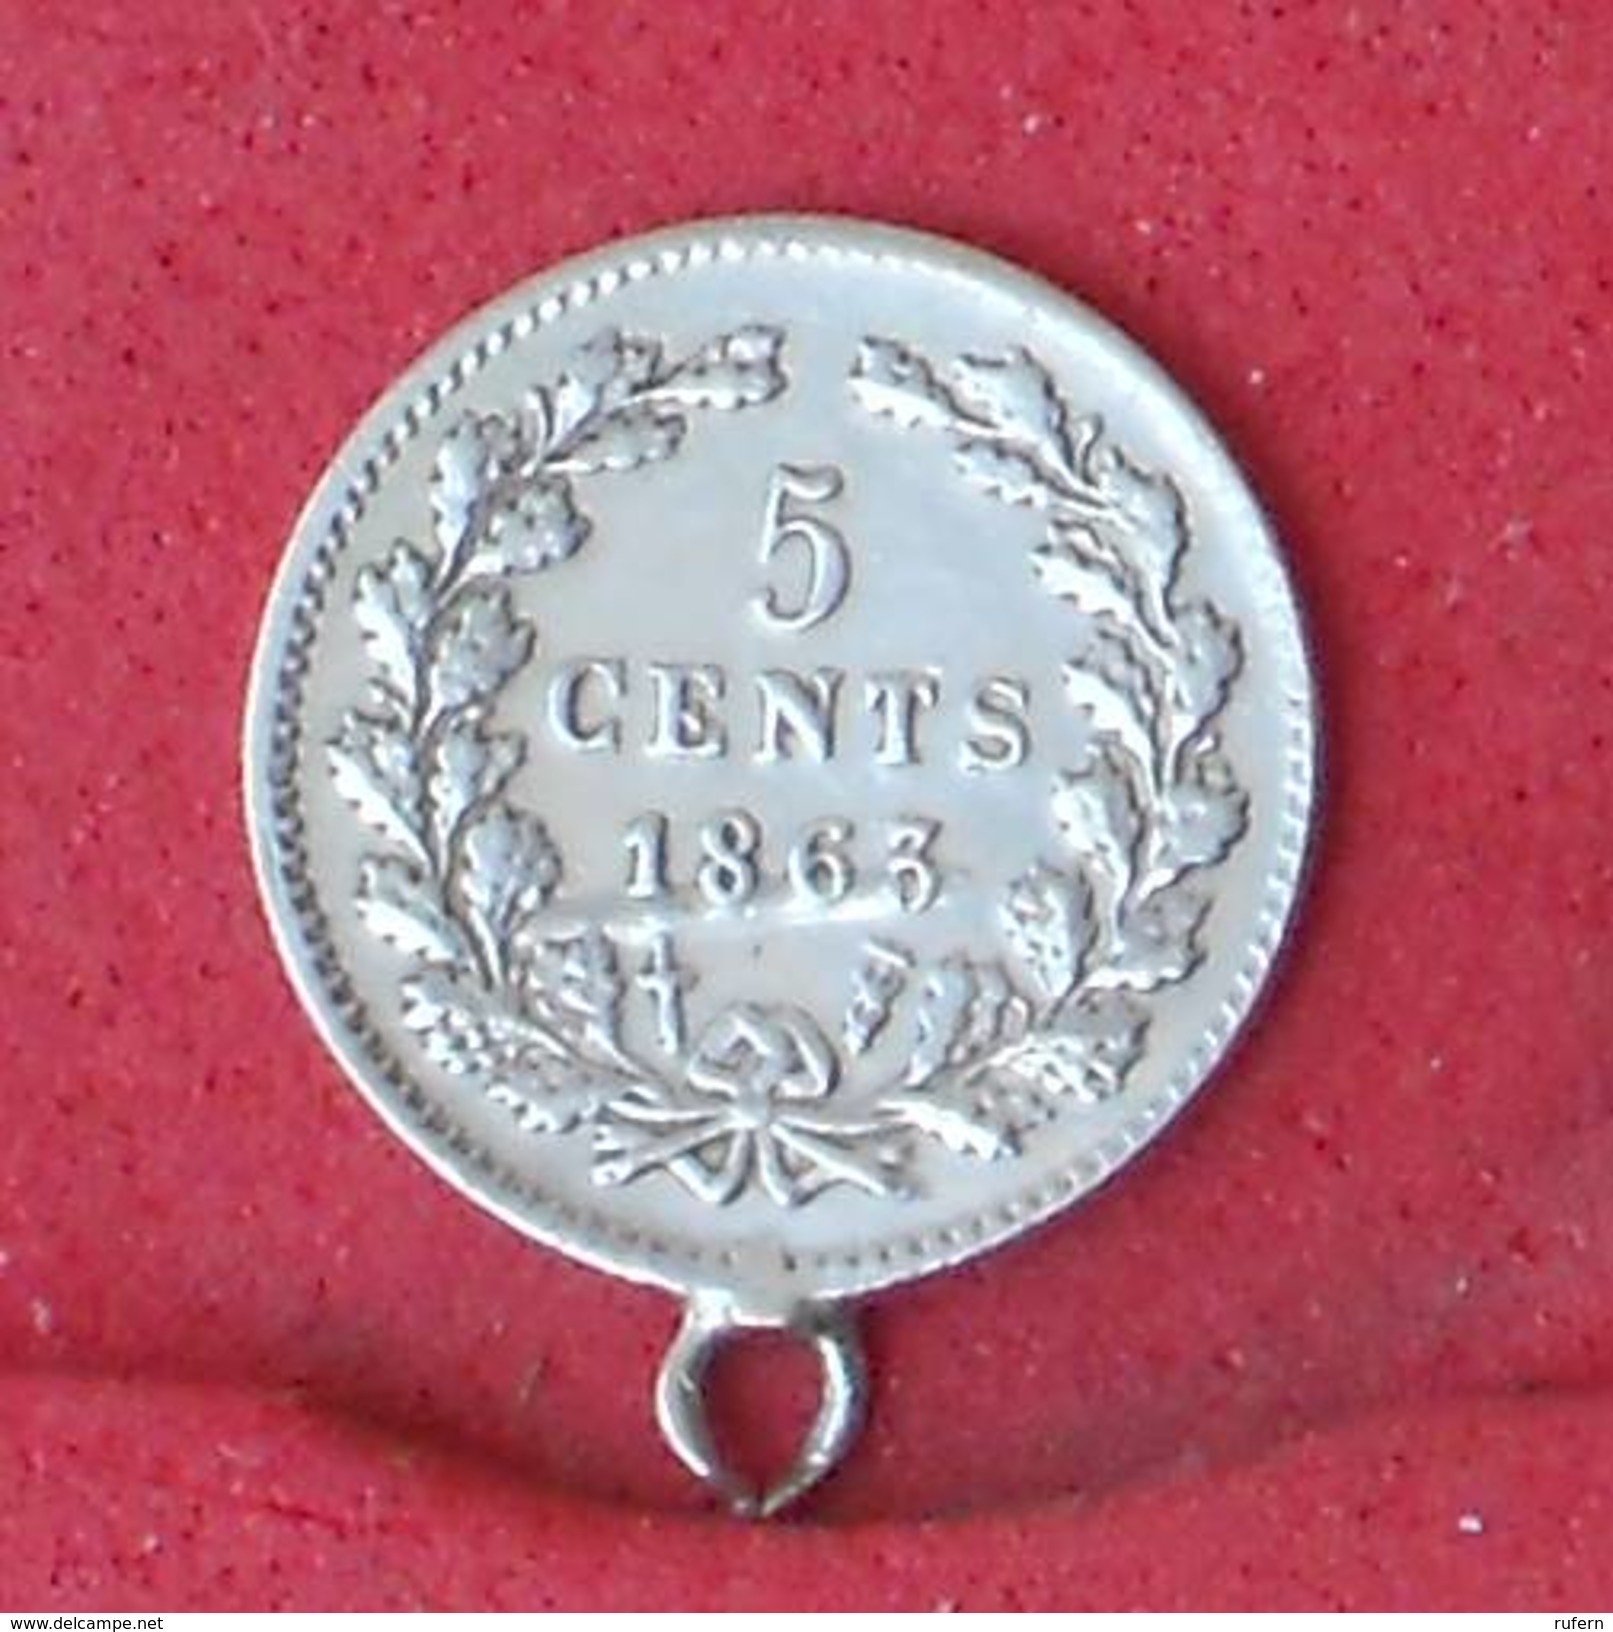 NETHERLANDS 5 CENTS 1863 - 0,69 GRS 0,640 SILVER   KM# 91 - (Nº18256) - 1849-1890 : Willem III